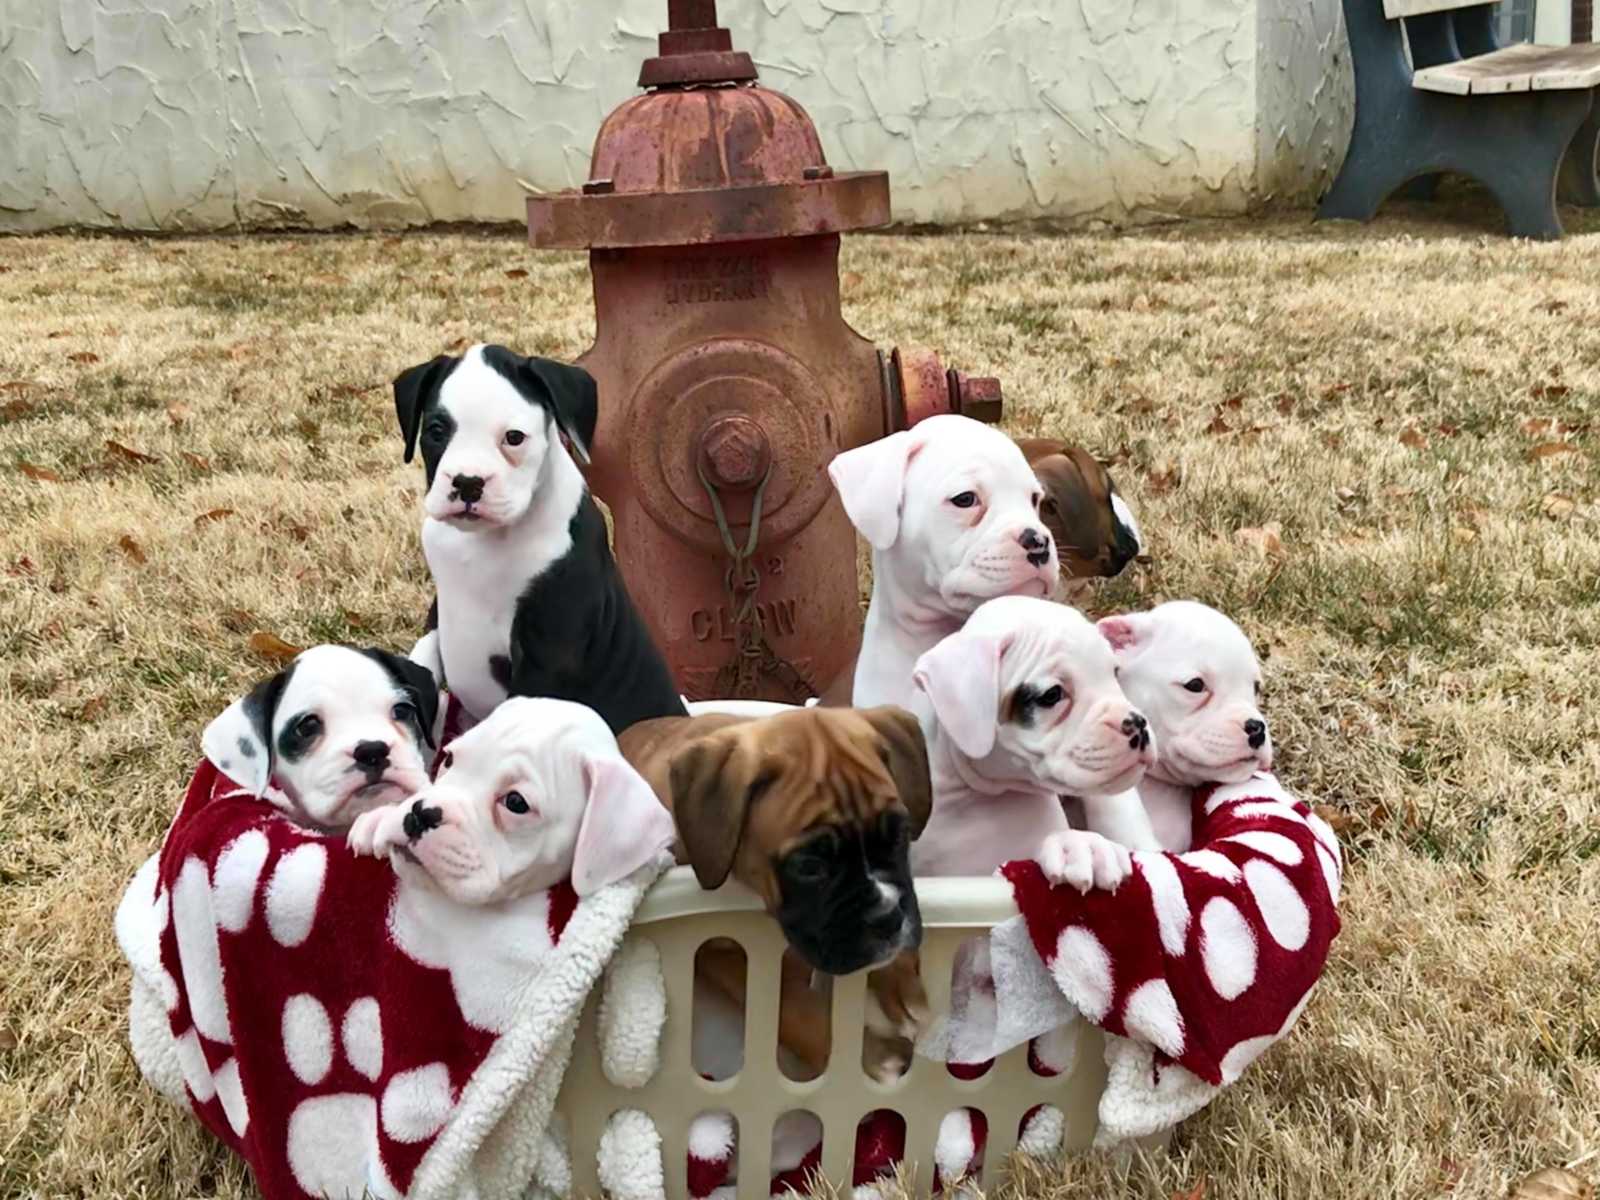 puppies sit in laundry basket with a red and white blanket with paw prints on in in from of fire hydrant